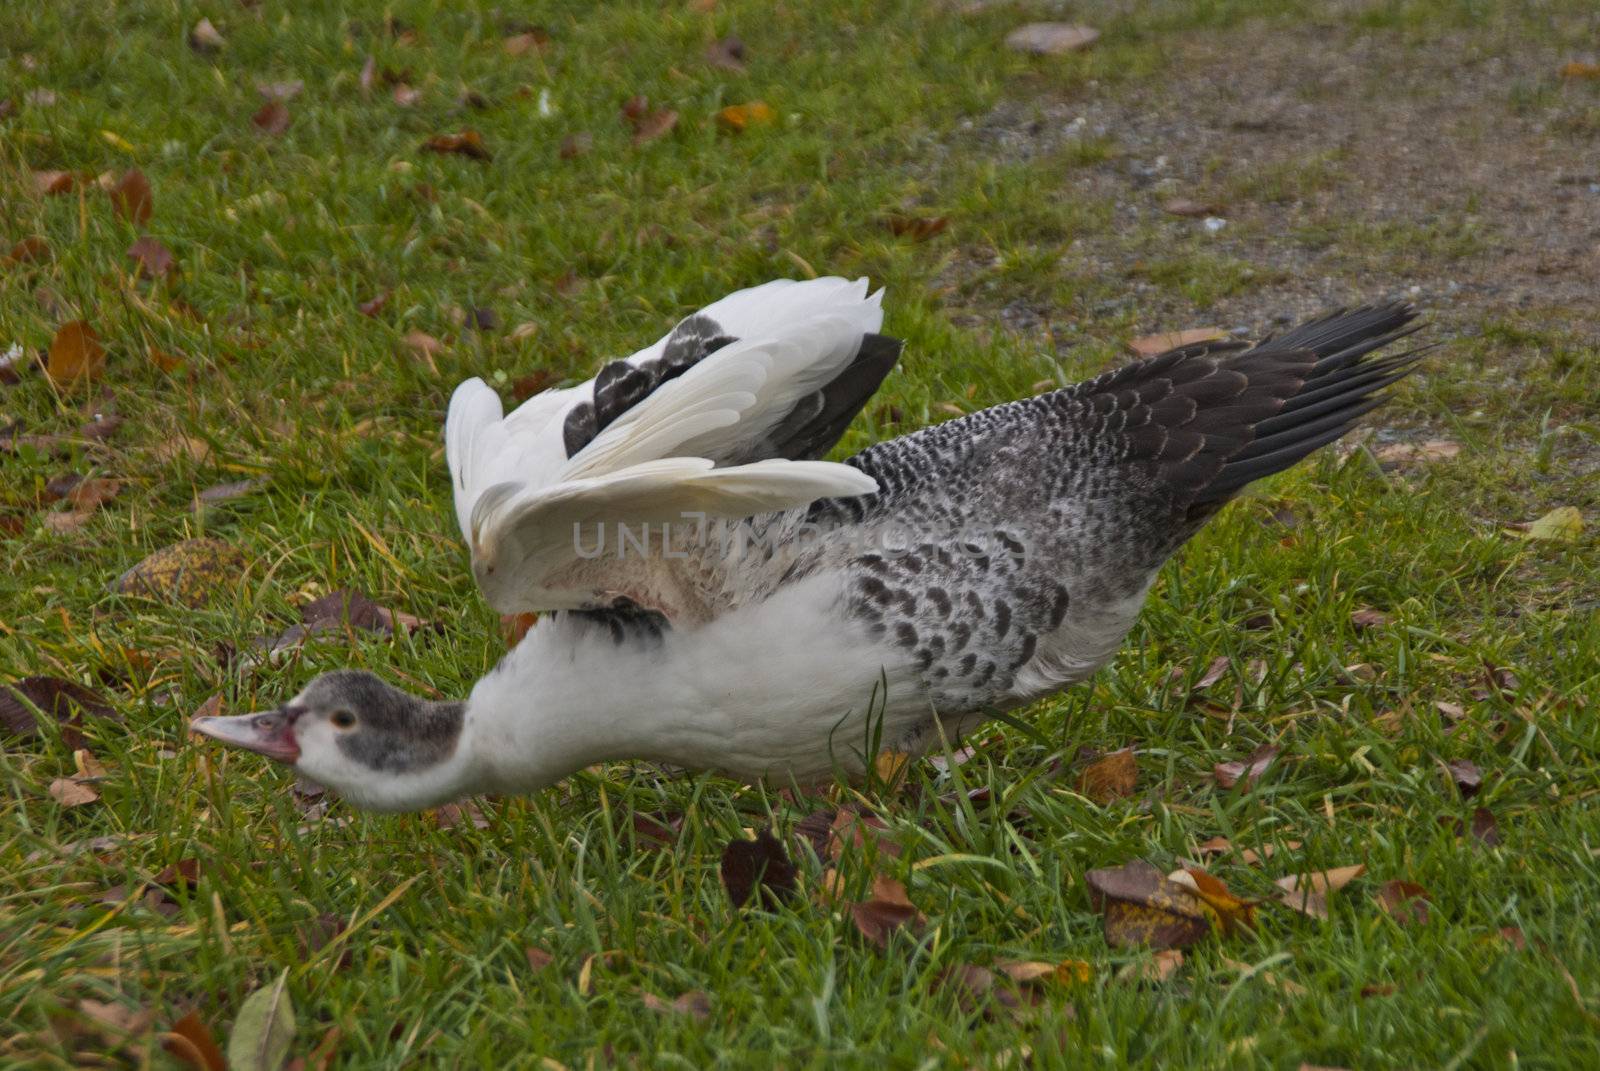 the muscovy duck (cairina moschata) is a large duck native to mexico, central, and south america. the pictures are shot at the duck pond at fredriksten fortress in halden